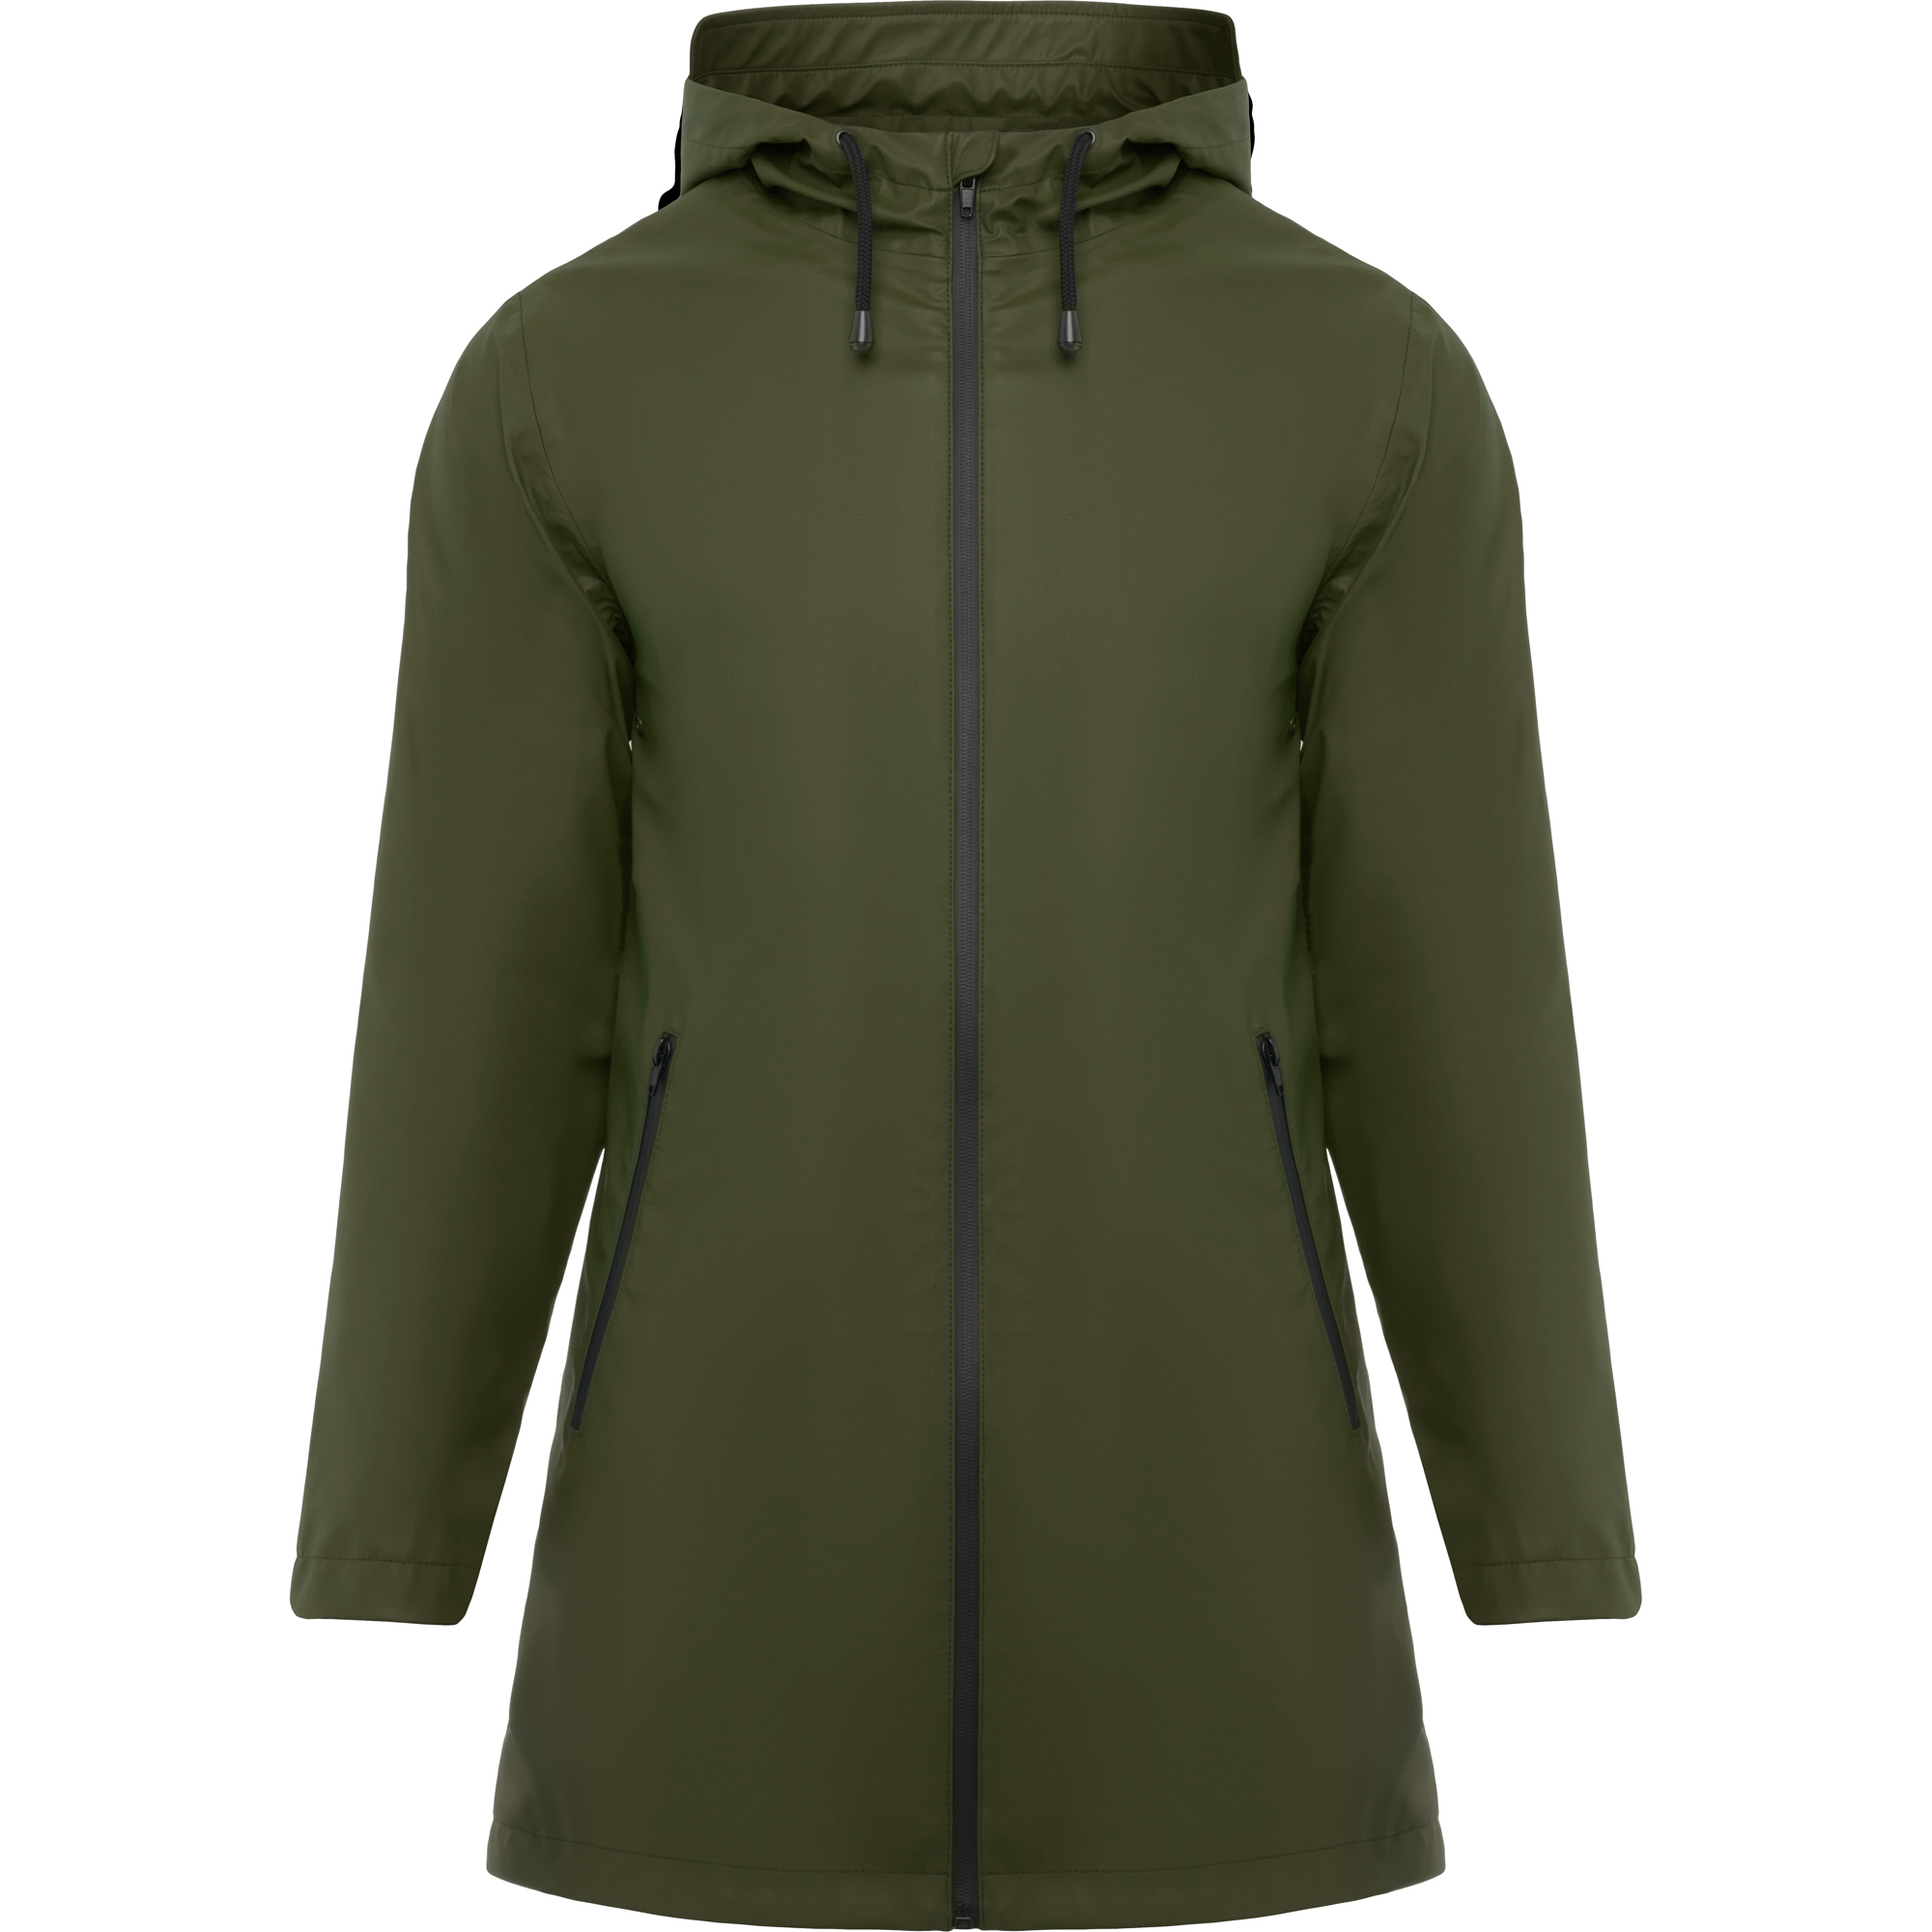 Chubasquero Impermeable Mujer ROLY 5202 Sitka Woman, compra online